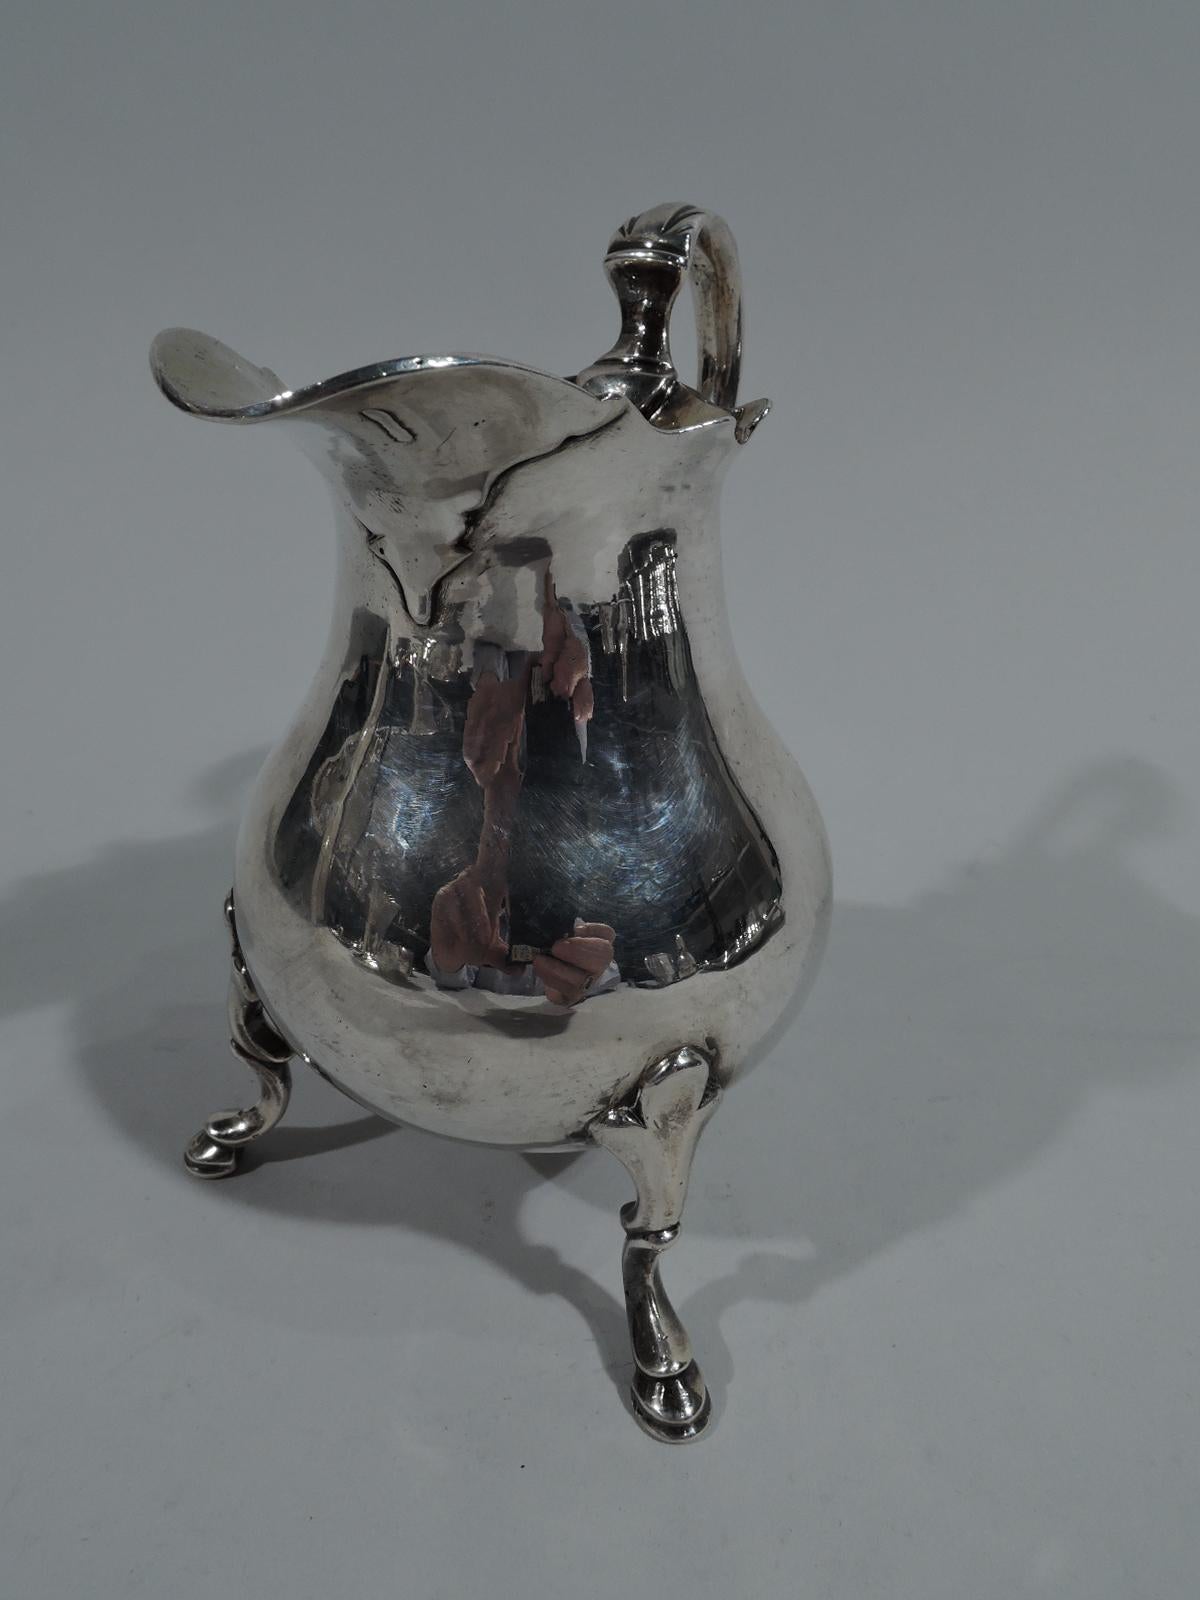 George II sterling silver creamer. Made in London in 1743. Baluster with scalloped helmet mouth, irregular leafy-spout, leaf-capped double-scroll handle, and 3 trefoil-mounted scrolled hoof supports. Interior gilt-washed. Beautiful Georgian with